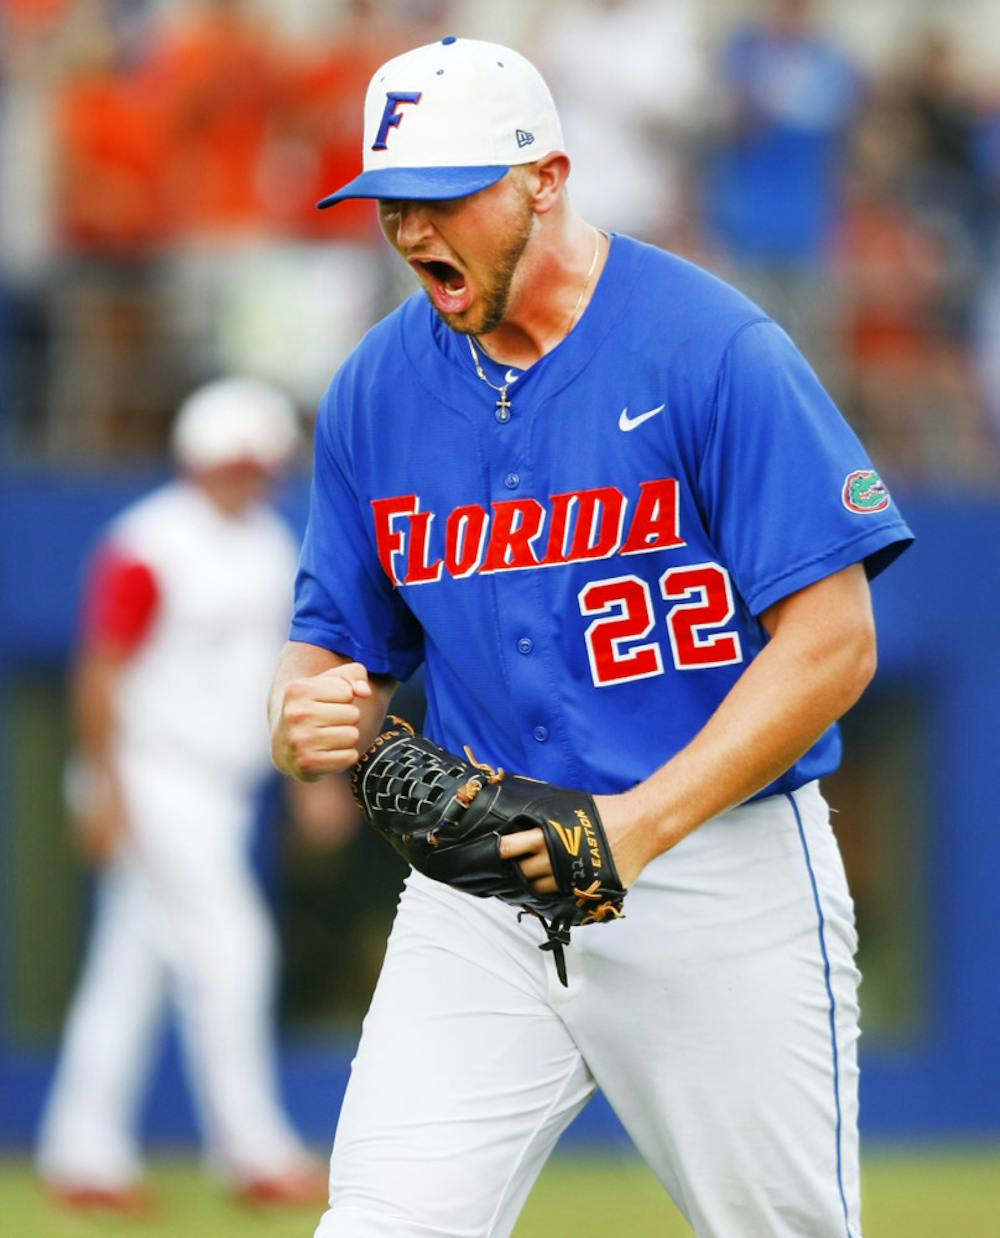 <p><span>Junior Karsten Whitson reacts after recording a strikeout during Florida’s 9-8 win against NC State on June 10, 2012, at McKethan Stadium. Whitson was drafted in the 37th round of the 2013 MLB Draft. </span></p>
<div><span><br /></span></div>